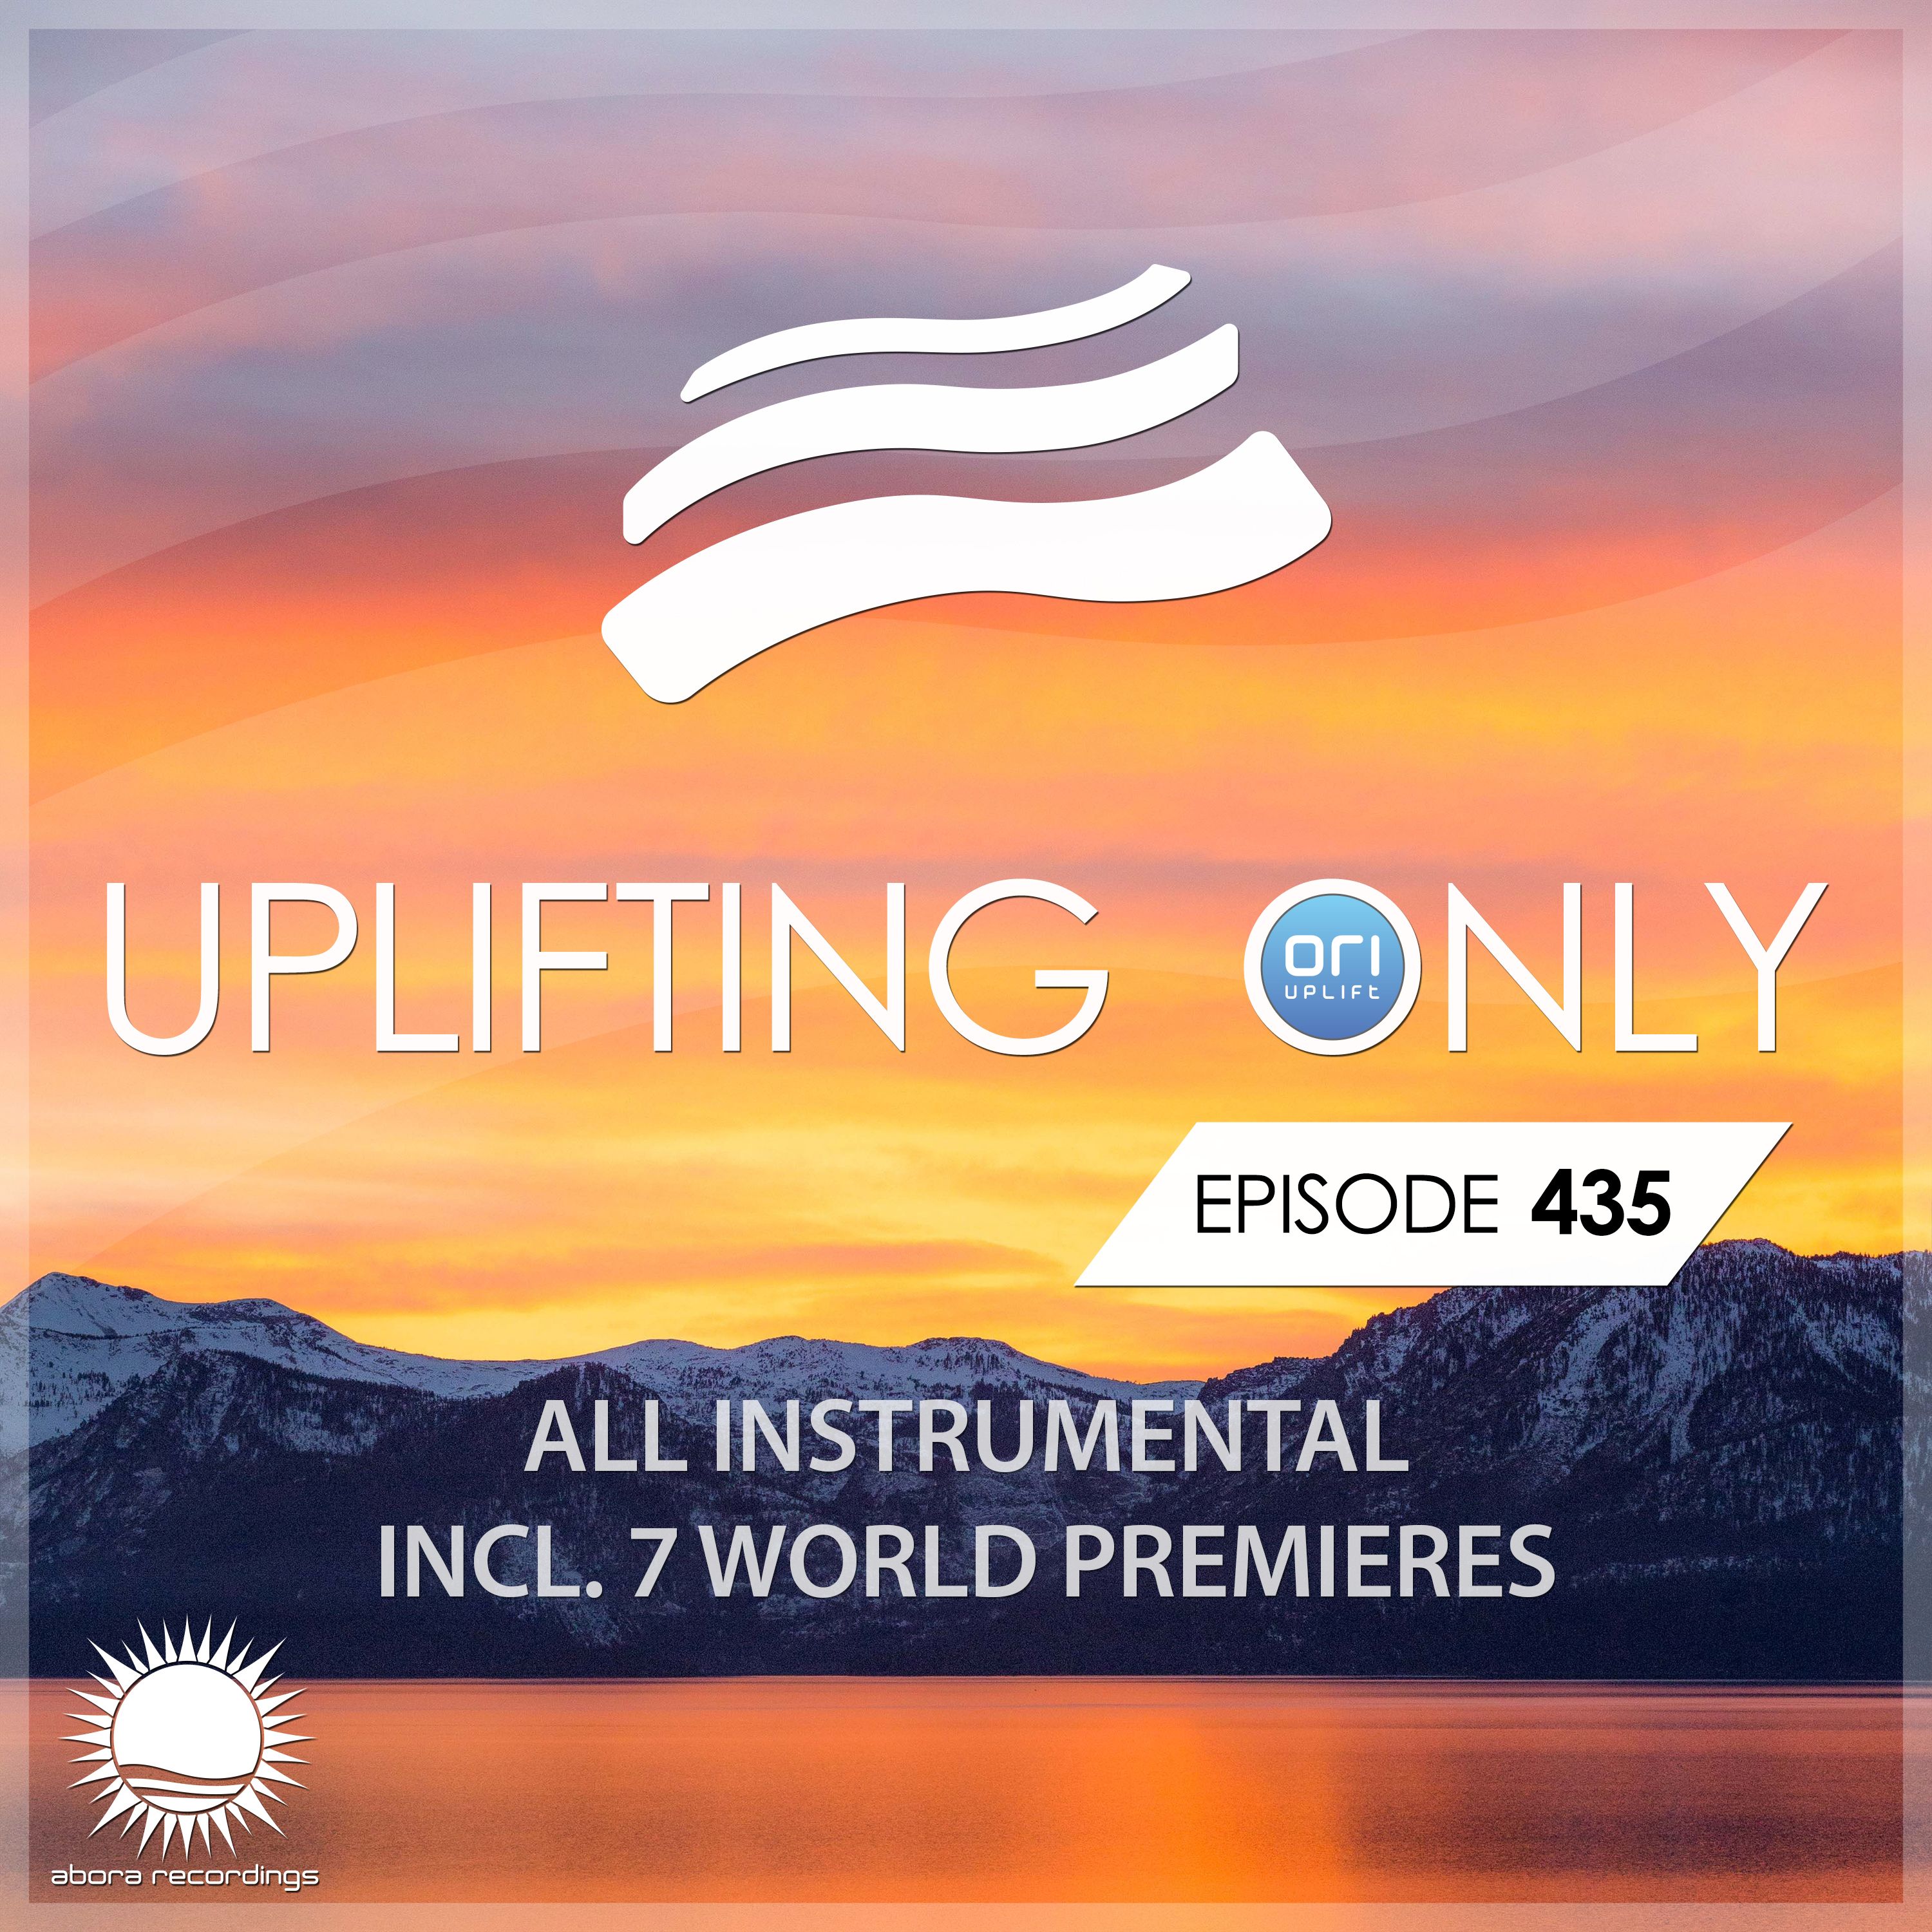 Uplifting Only 435 (June 10, 2021) [All Instrumental]